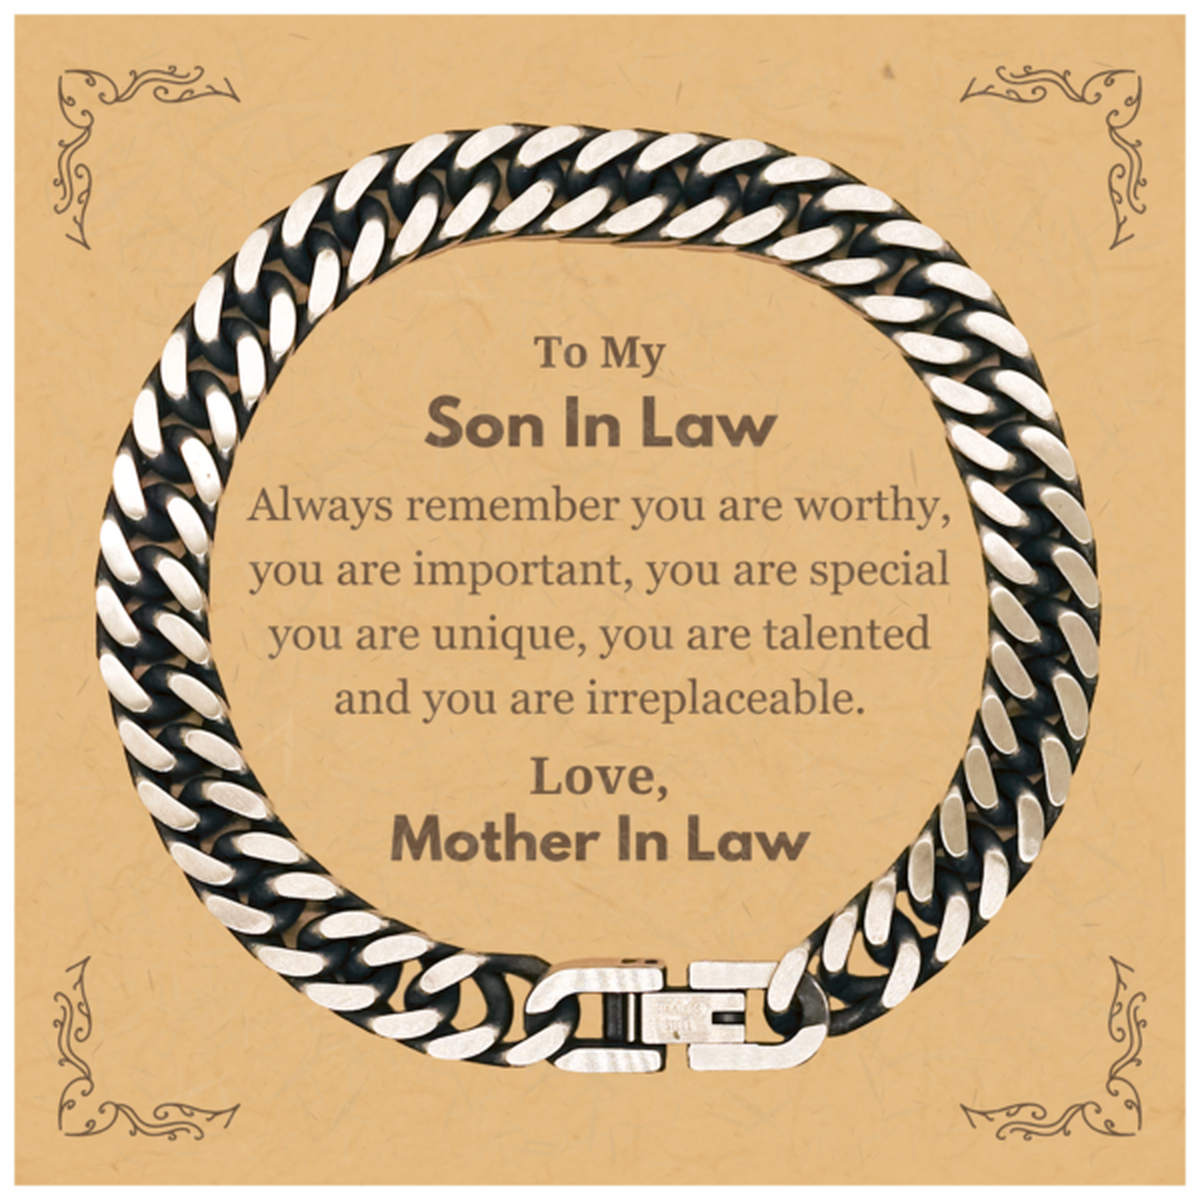 Son In Law Birthday Gifts from Mother In Law, Inspirational Cuban Link Chain Bracelet for Son In Law Christmas Graduation Gifts for Son In Law Always remember you are worthy, you are important. Love, Mother In Law